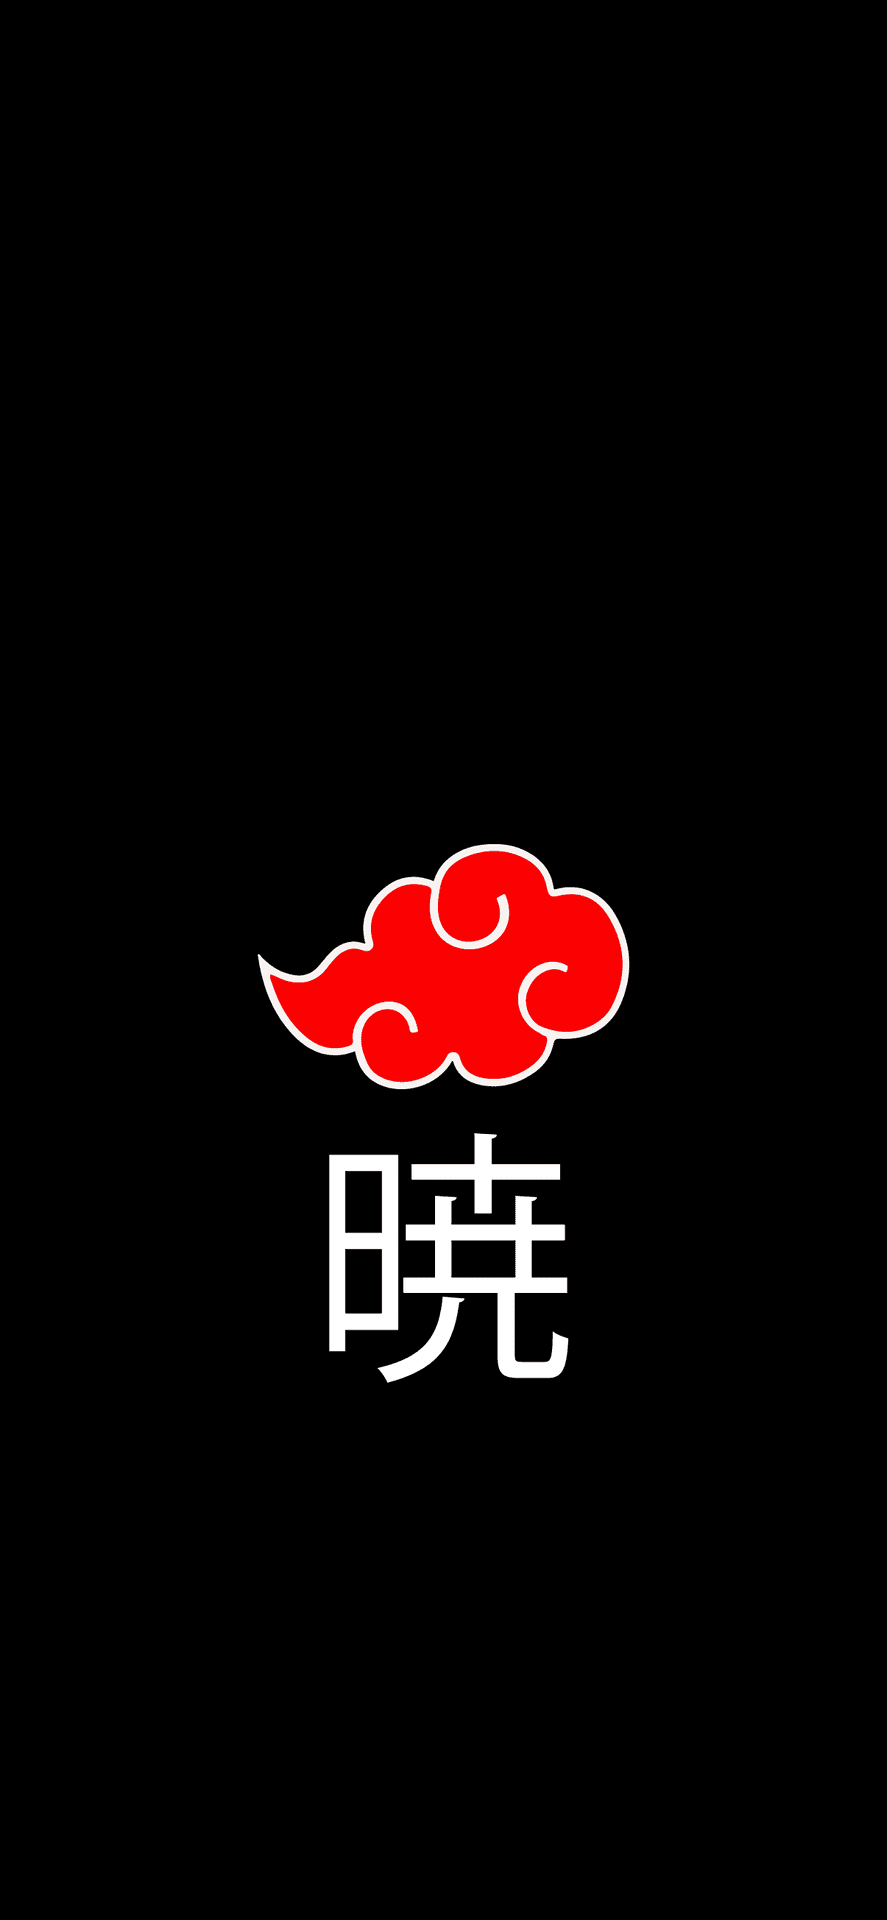 The Mighty Symbol Of The Akatsuki Clan Against A Cloudy Sky